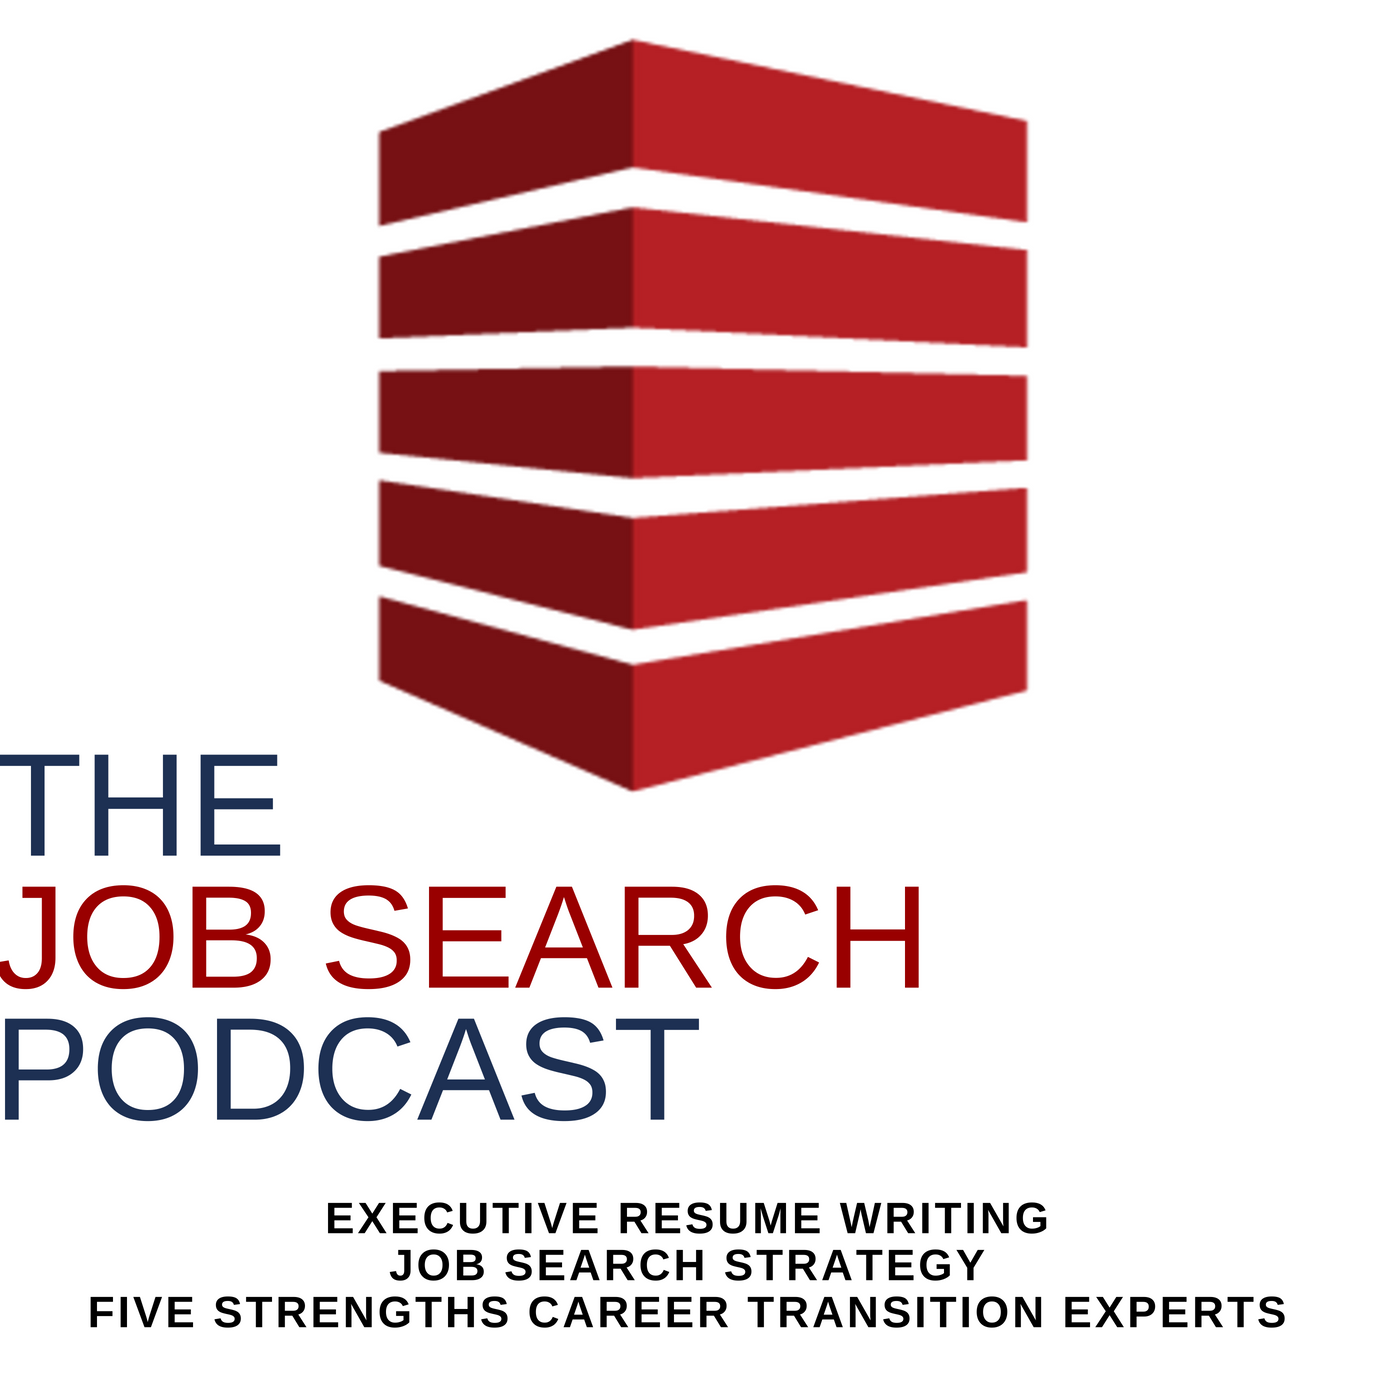 A Simple Research Plan for Executive Job Search Success, Part 5  | The Job Search Podcast